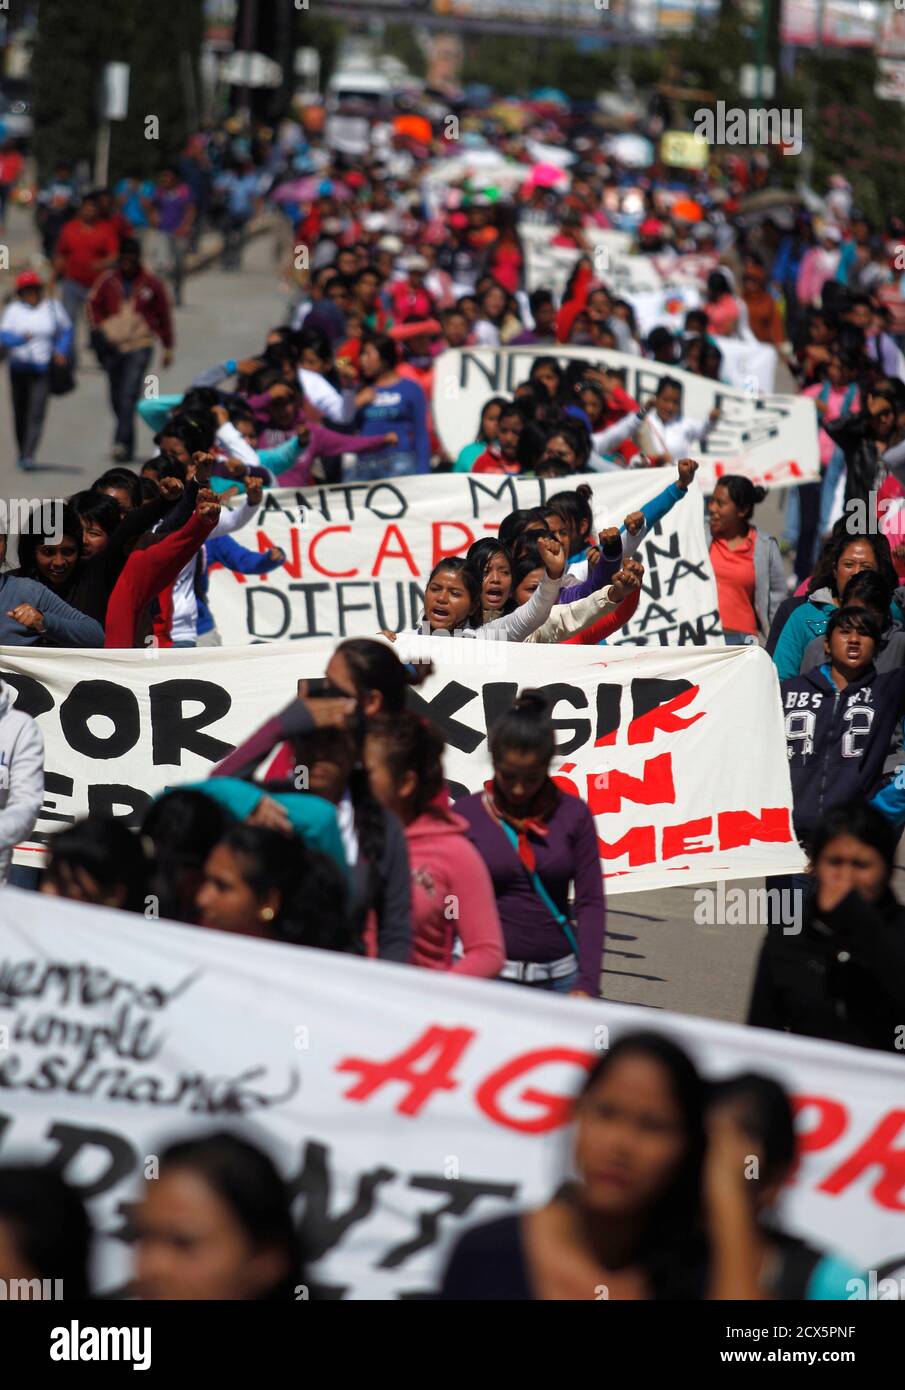 Activists participate in a protest march to demand that the government find the 43 missing students from Ayotzinapa Teacher Training College Raul Isidro Burgos in Chilpancingo, Guerrero, November 14, 2014. Criticism of the government has intensified in Mexico since Attorney General Jesus Murillo said last week that evidence suggests 43 missing trainee teachers were murdered by gunmen and drug gangs in collaboration with corrupt police and local politicians. The students were reportedly incinerated in a bonfire at a garbage dump and their ashes thrown in a river. Authorities said some of the st Stock Photo